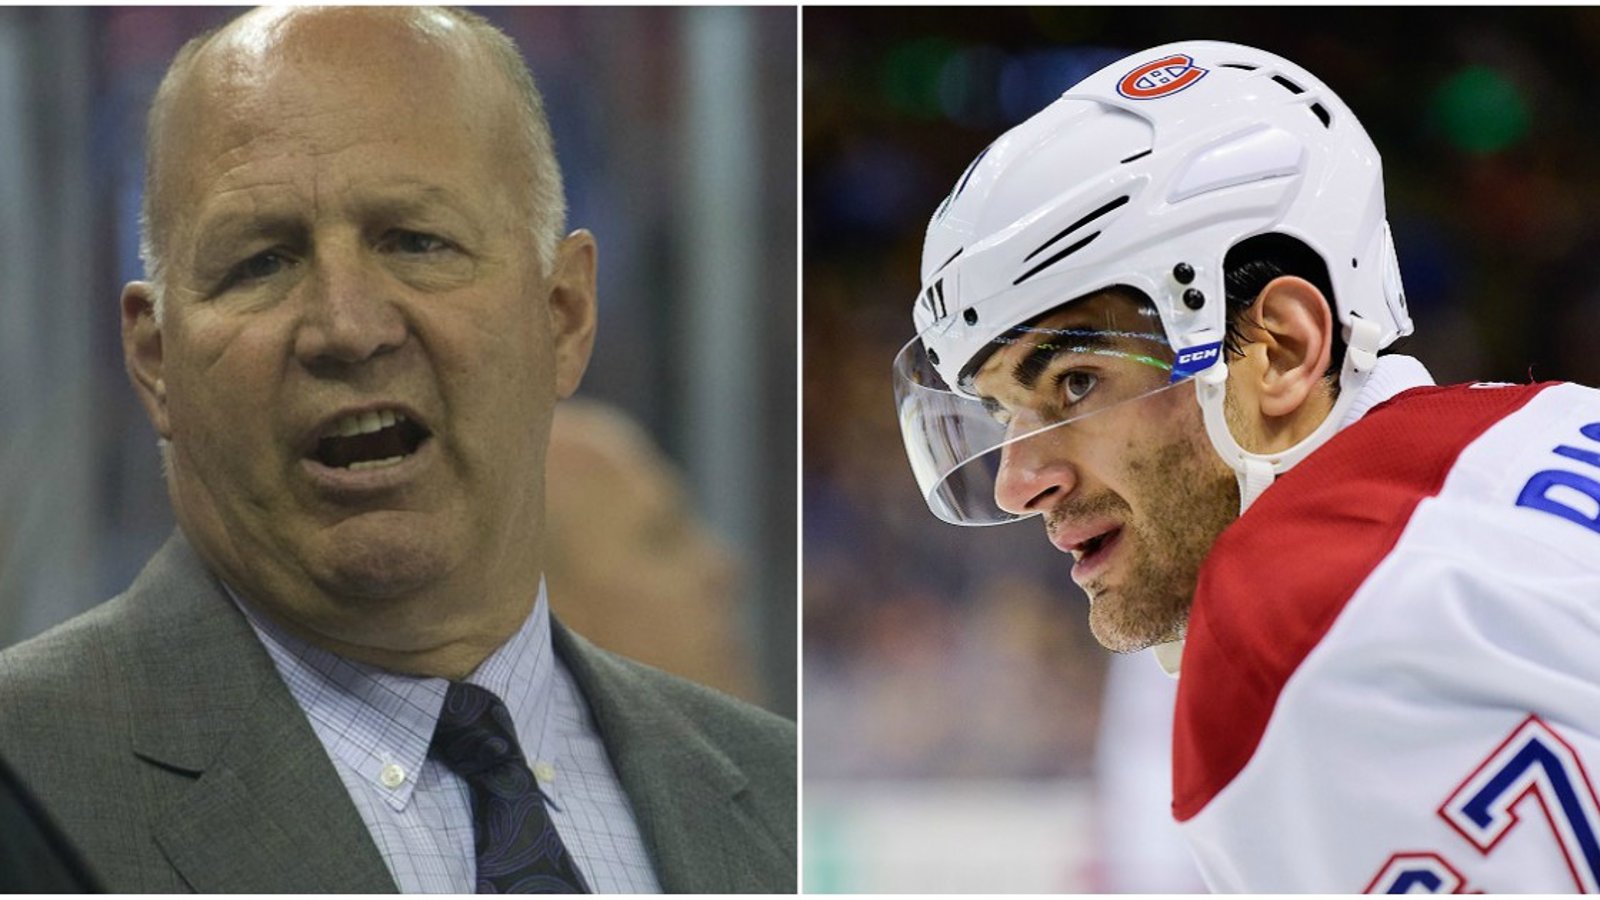 Claude Julien comments on Max Pacioretty's recent struggles.